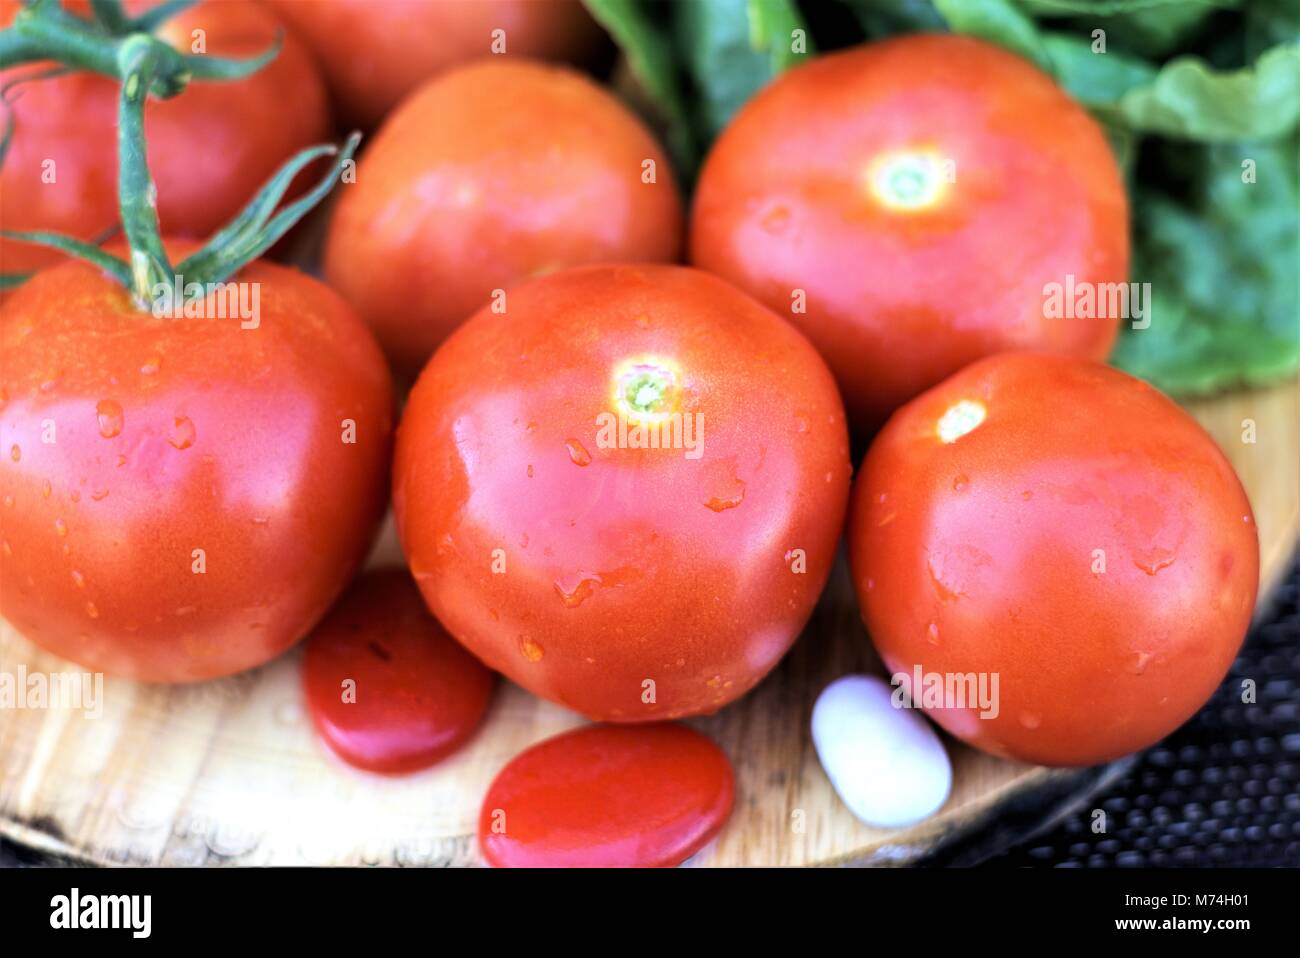 Juicy tomatoes of Roma variety. Organic Tomato is salad vegetable rich in vitamin c. Shot from angle, close up isolated tomatoes on wooden board Stock Photo